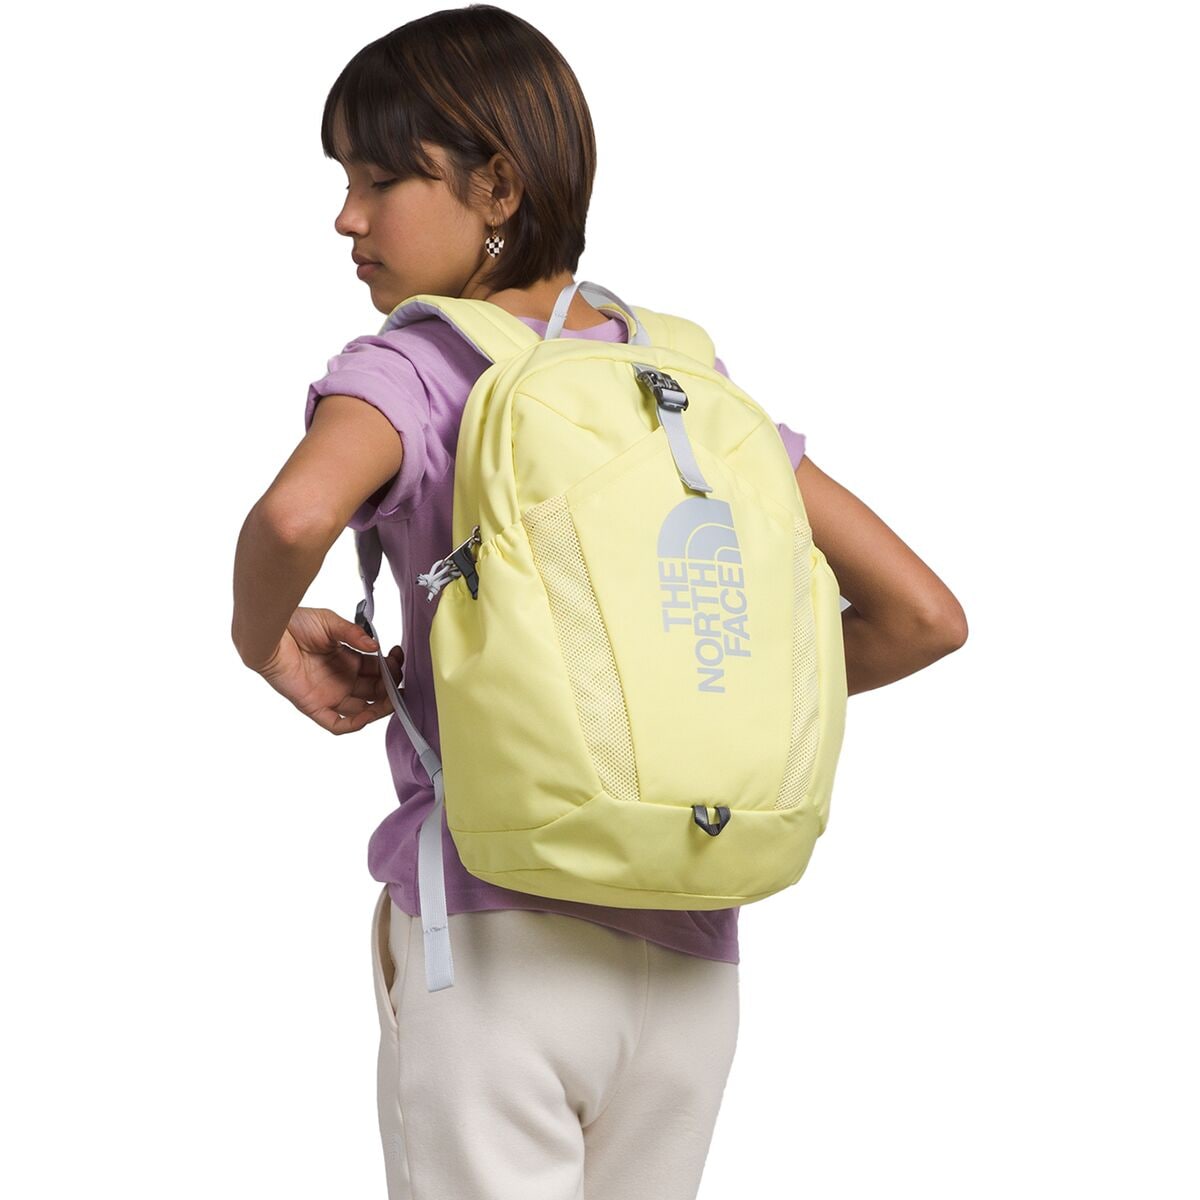 The North Face Mini Recon 20L Backpack - Kids' - Kids